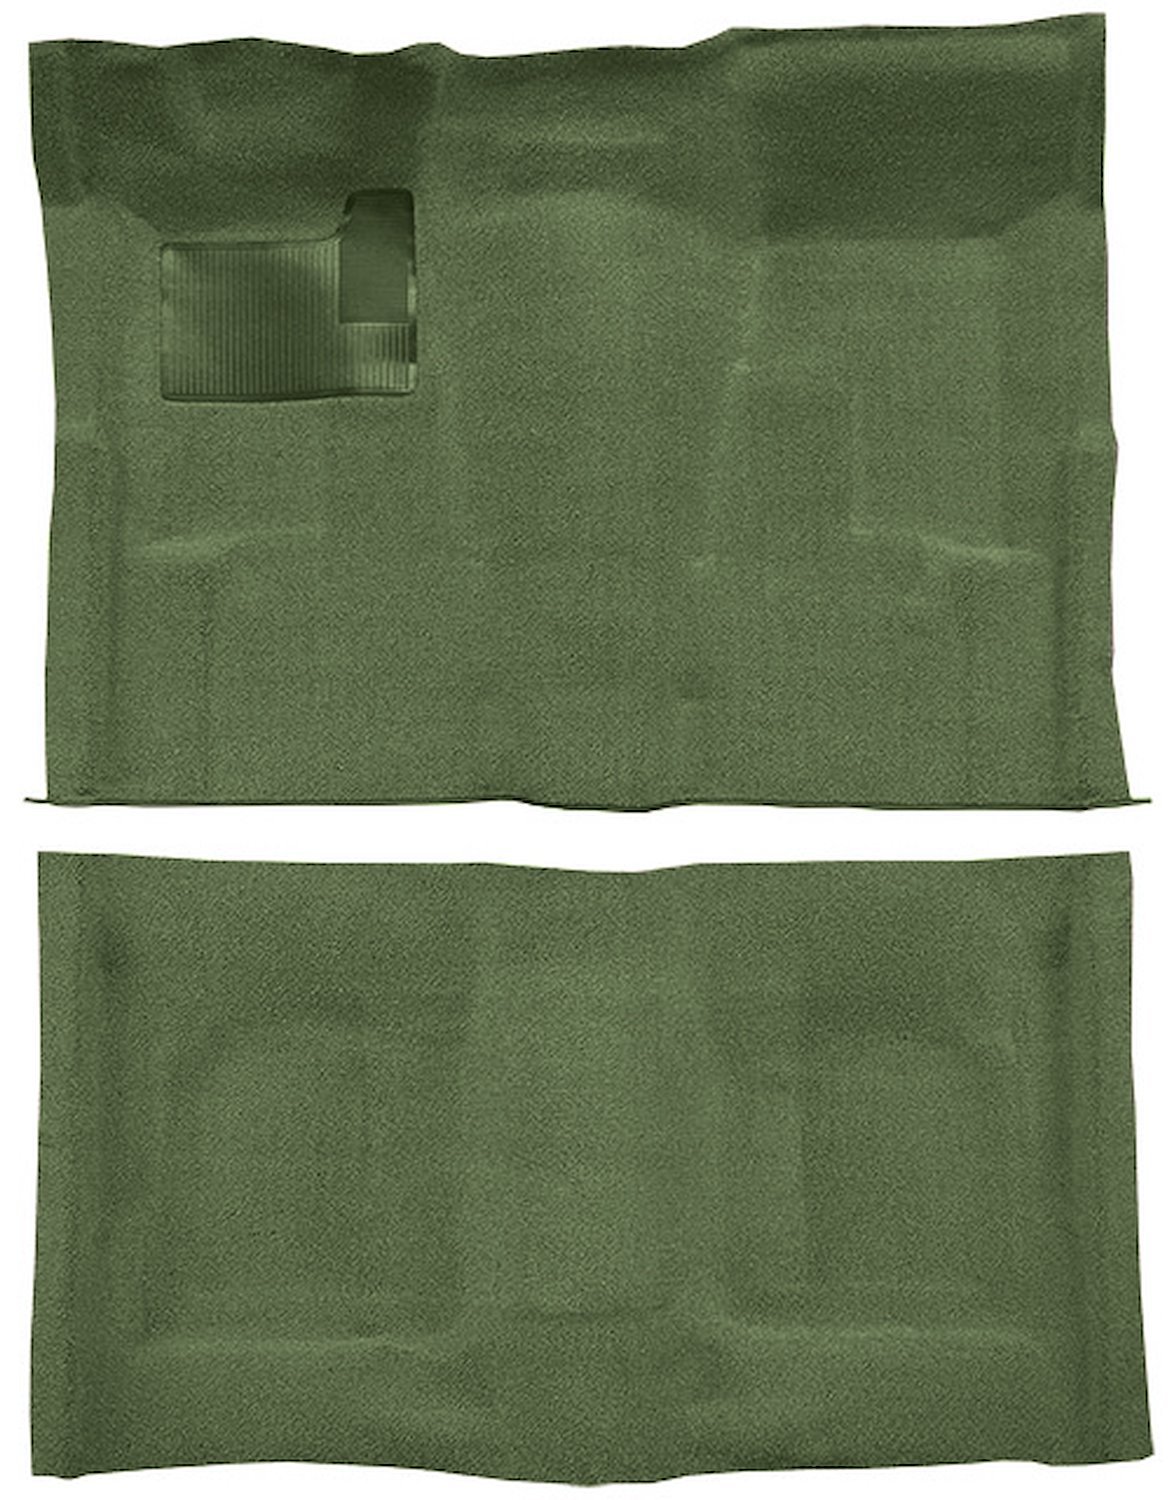 Molded Cut Pile Carpet for 1974-1979 Chevrolet Nova [OE-Style Jute Backing, Automatic Transmission, Willow Green]